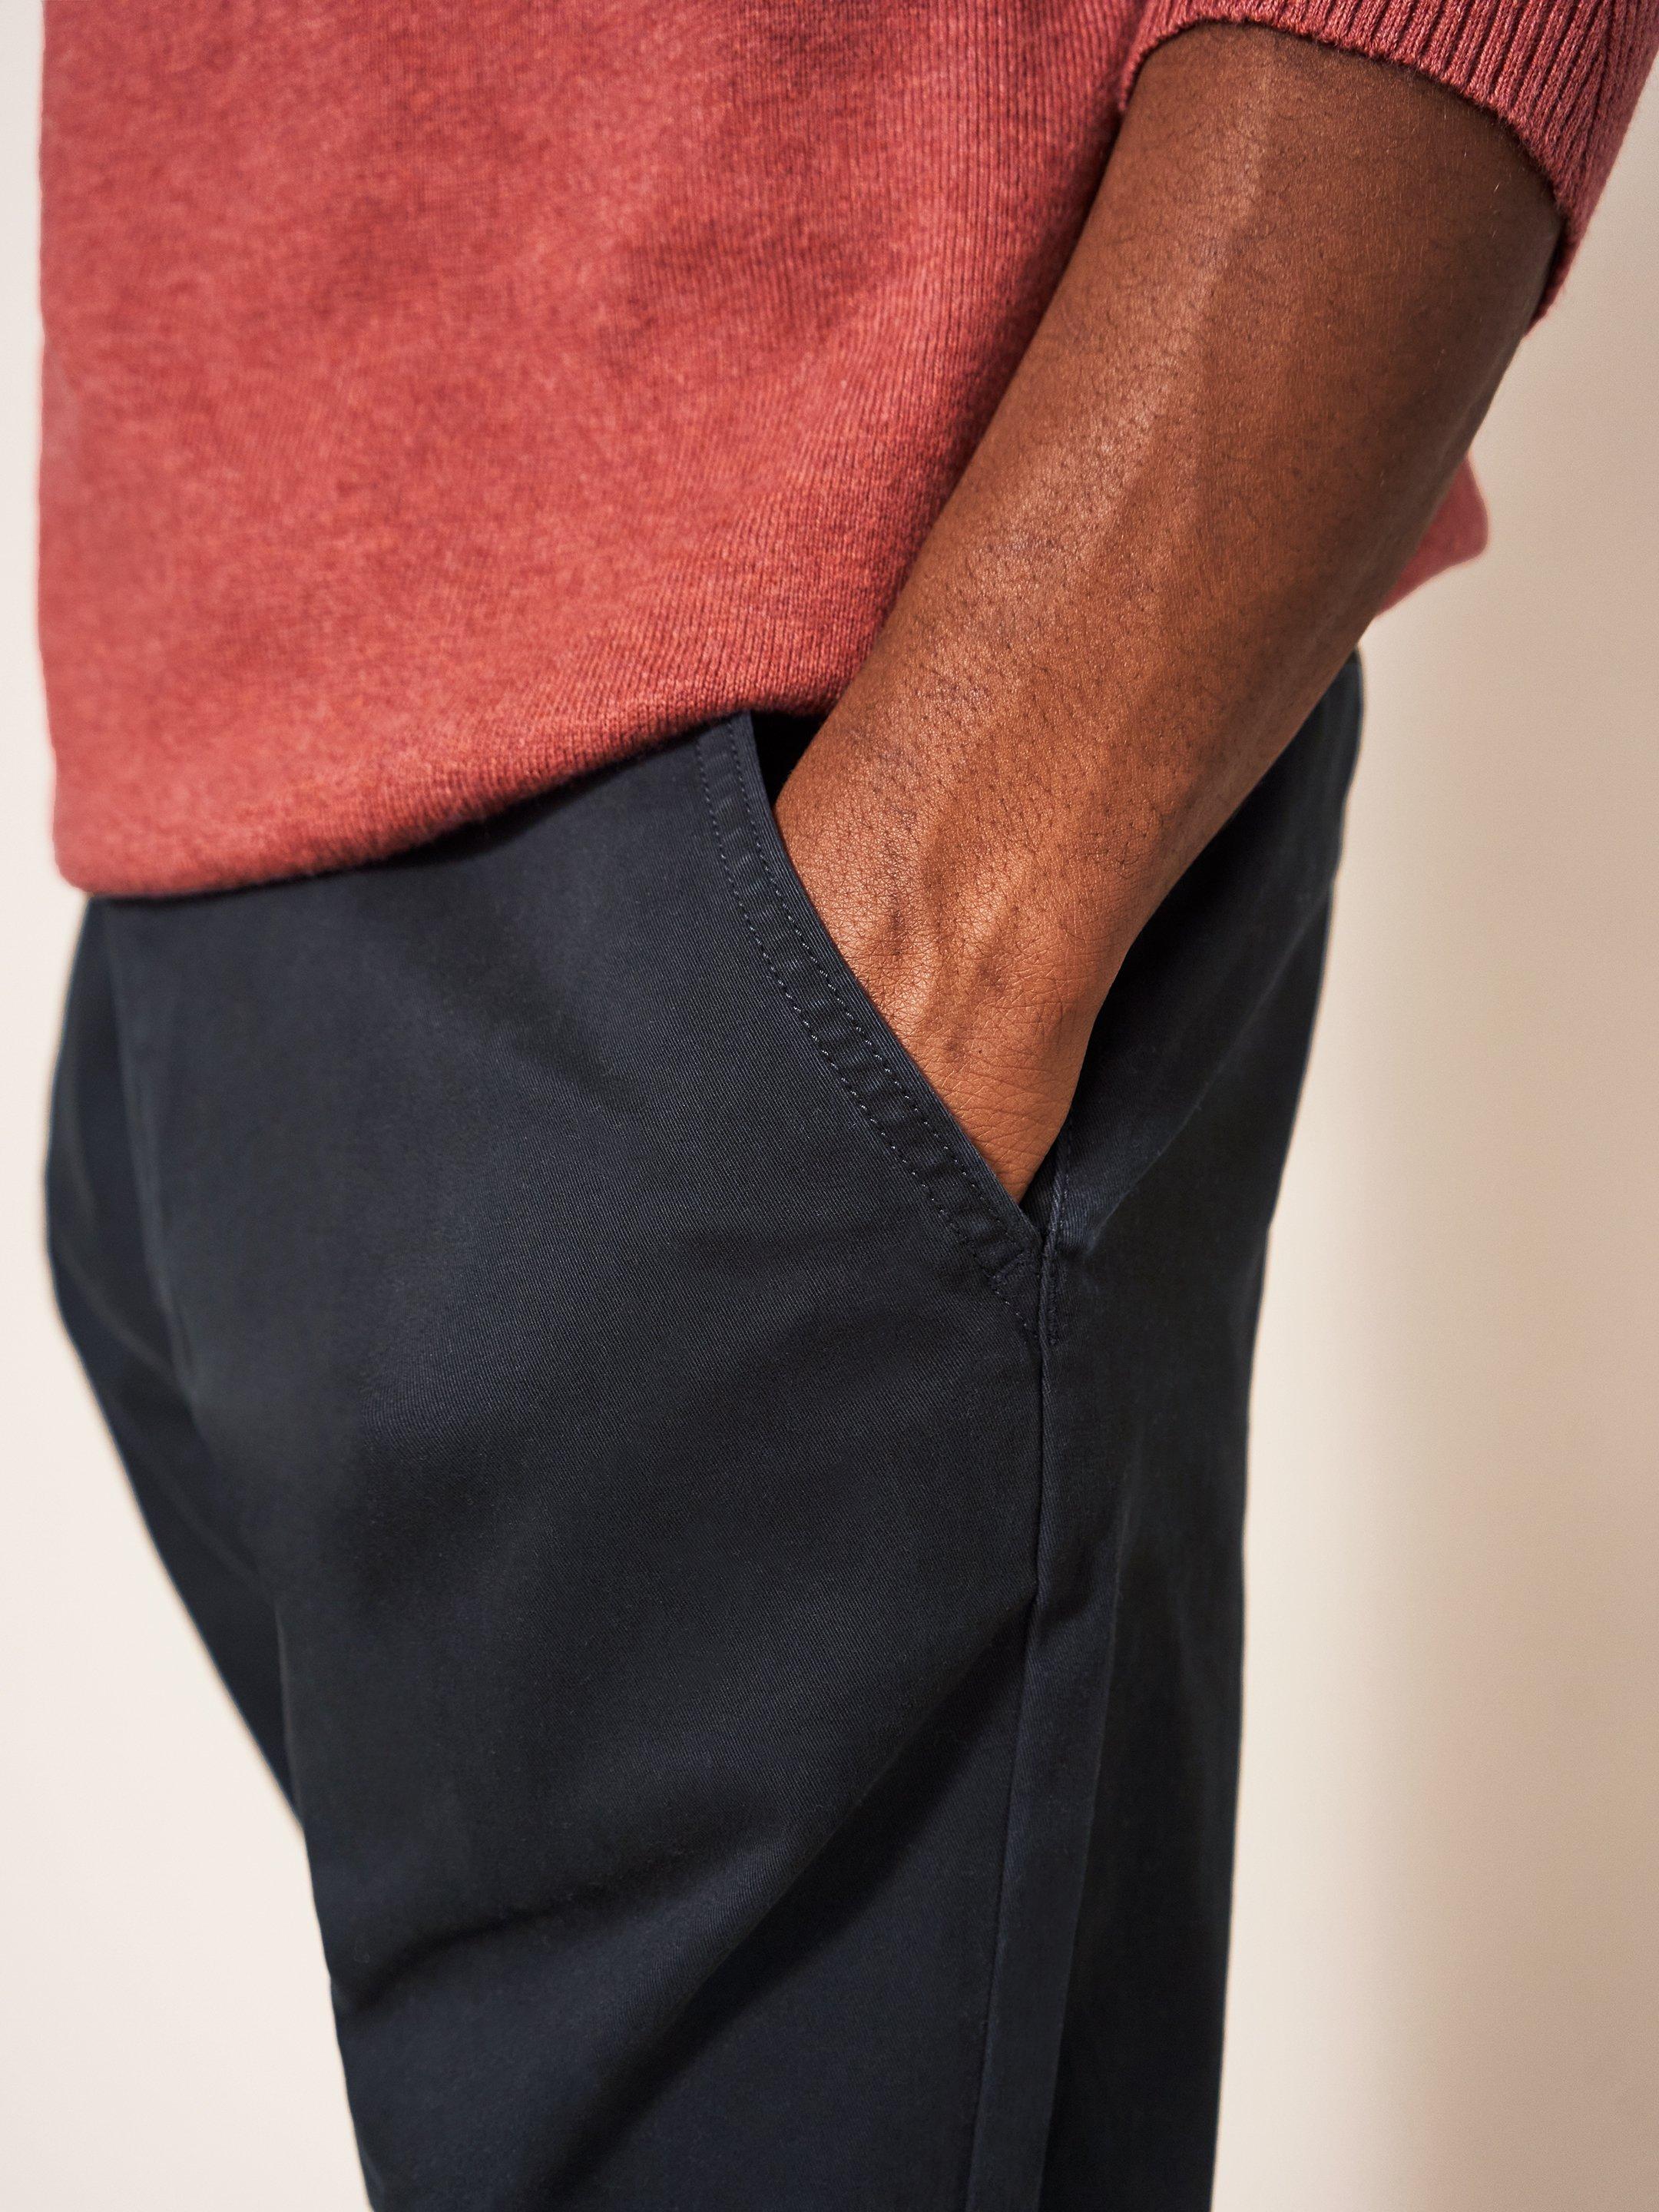 Elm Chino Trouser in PURE BLK - MODEL DETAIL